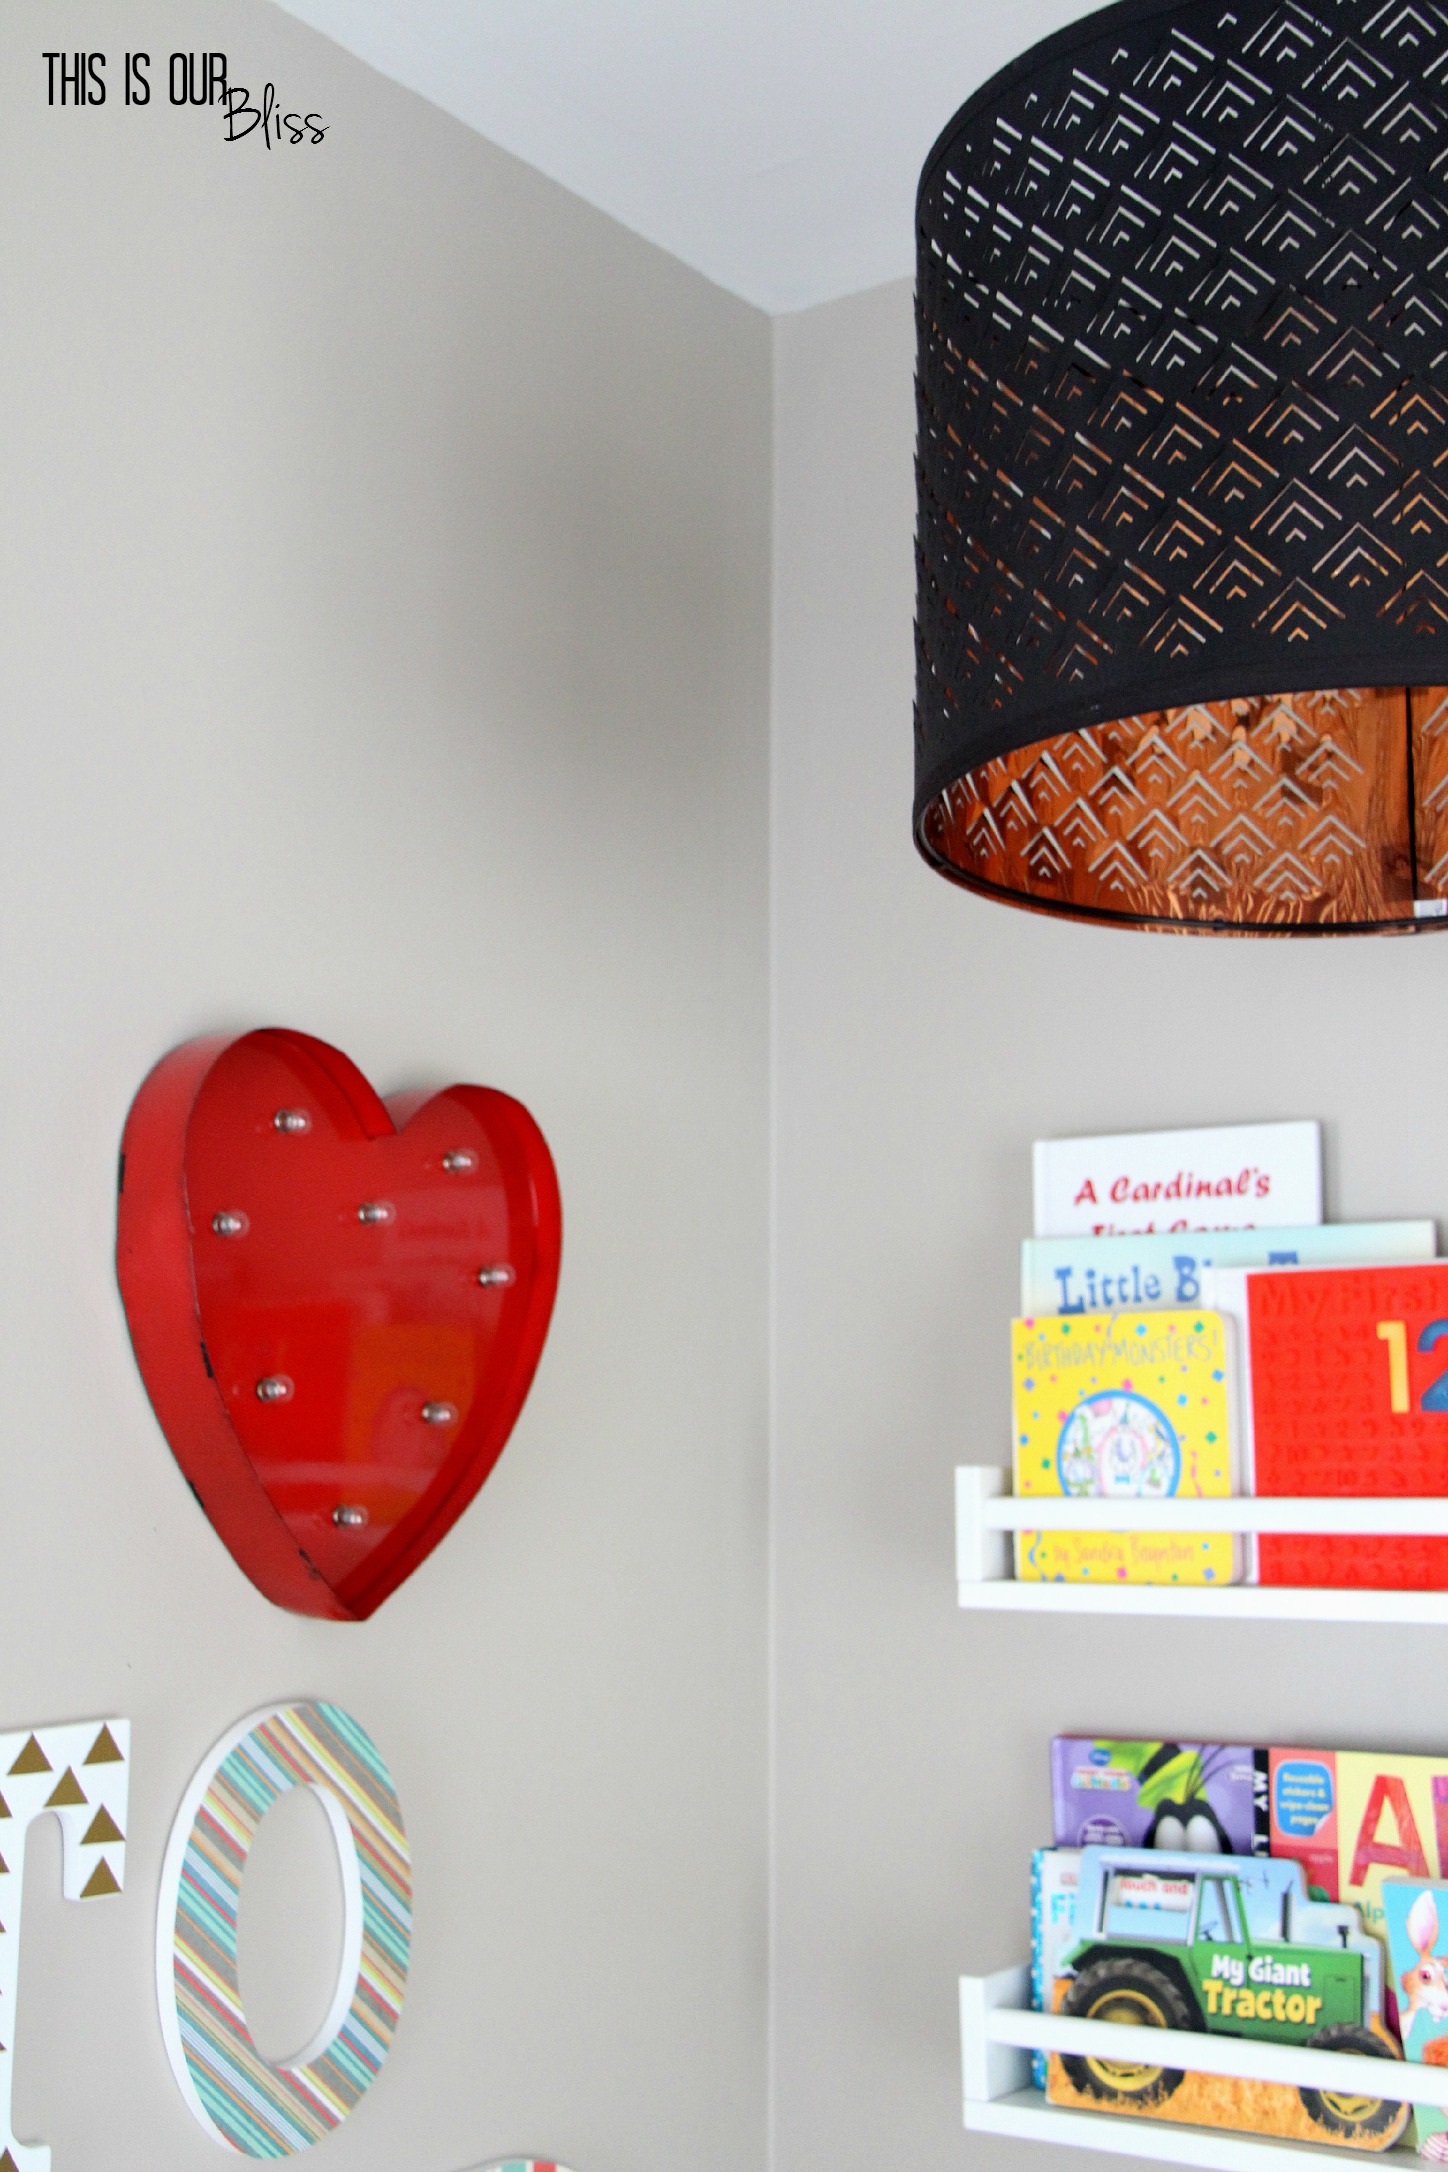 playroom reading nook - DIY reading nook light - reading corner - kids room - DIY book shelves This is our Bliss